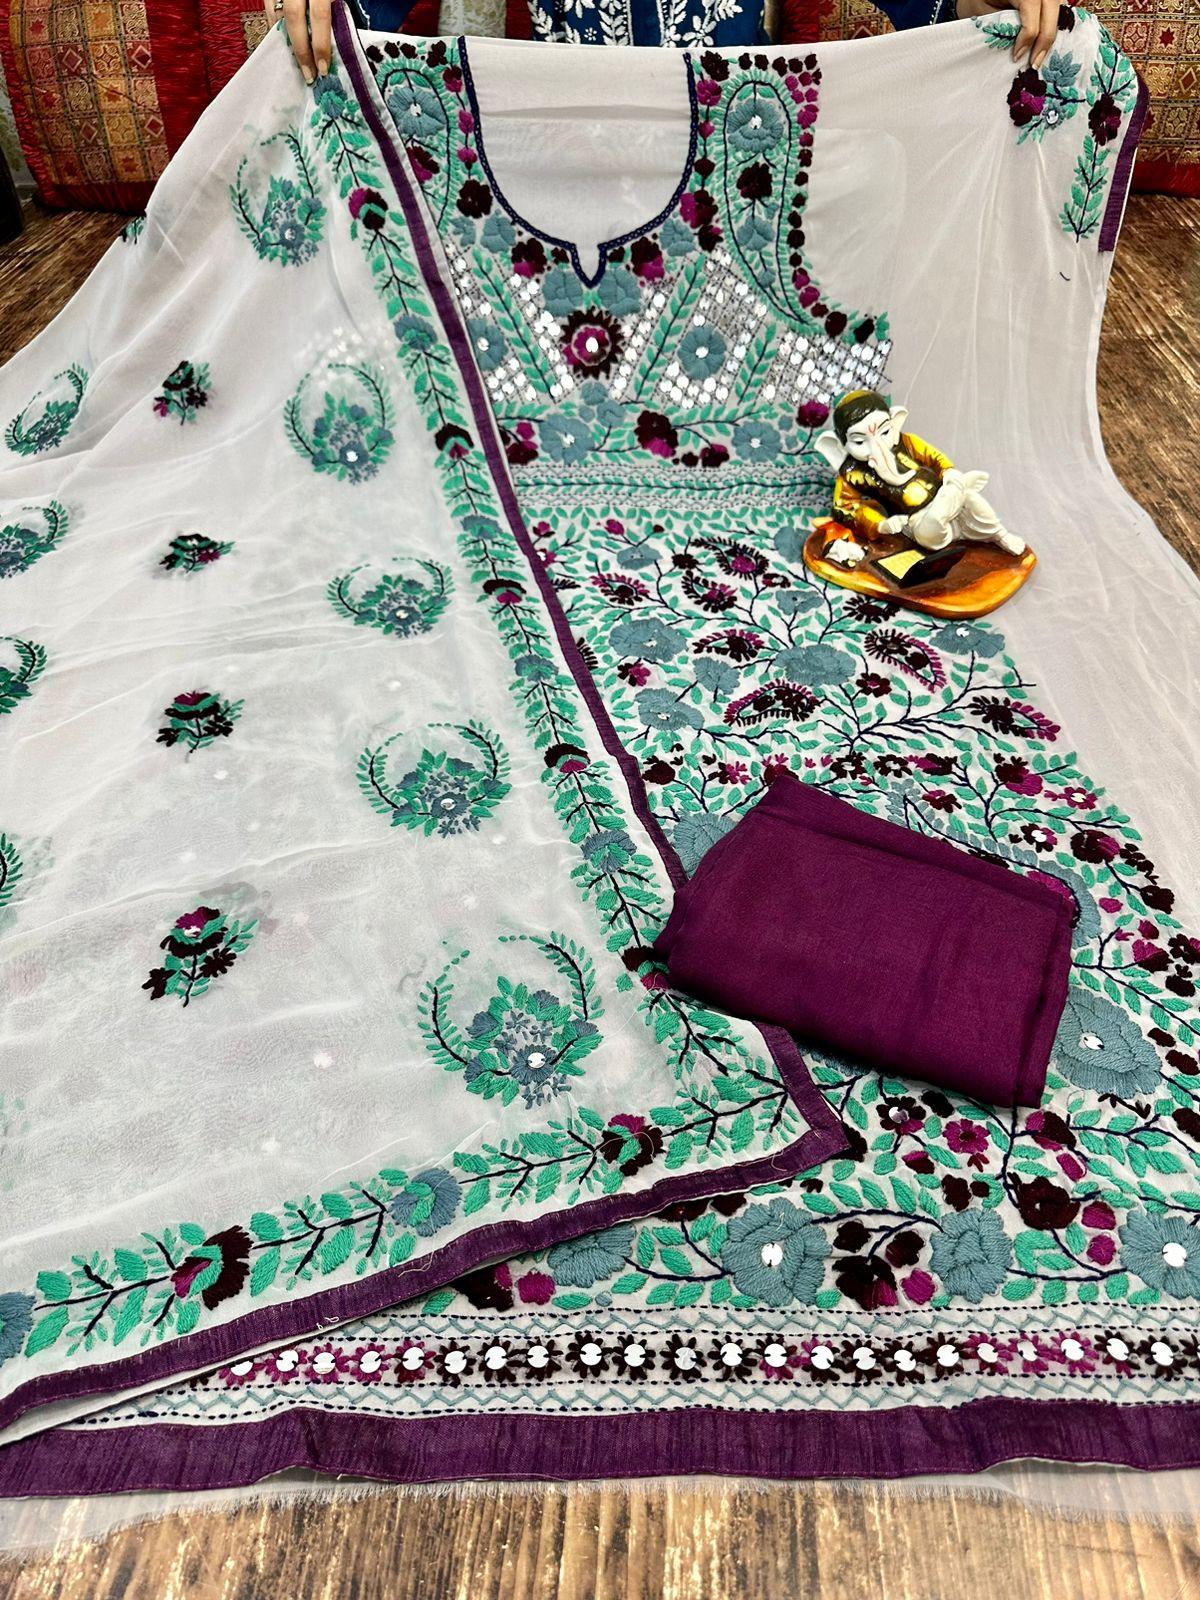 White & Blue Super Georgette Phulkari Suits with Beautiful Embroidery Shopping Online - Inayakhan Shop 